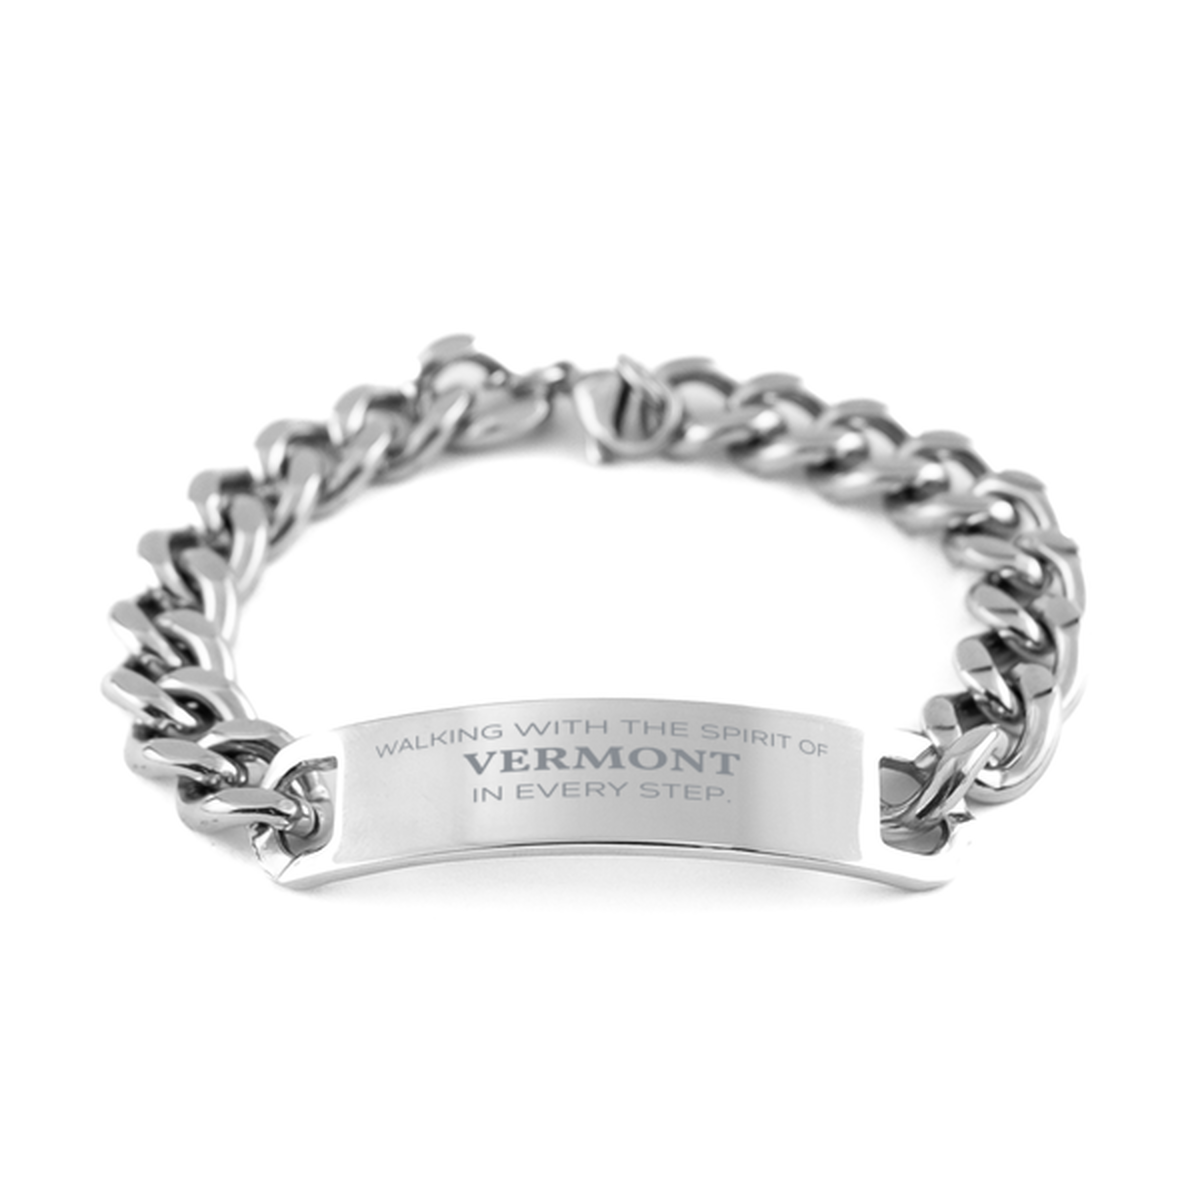 Vermont Gifts, Walking with the spirit, Love Vermont Birthday Christmas Cuban Chain Stainless Steel Bracelet For Vermont People, Men, Women, Friends